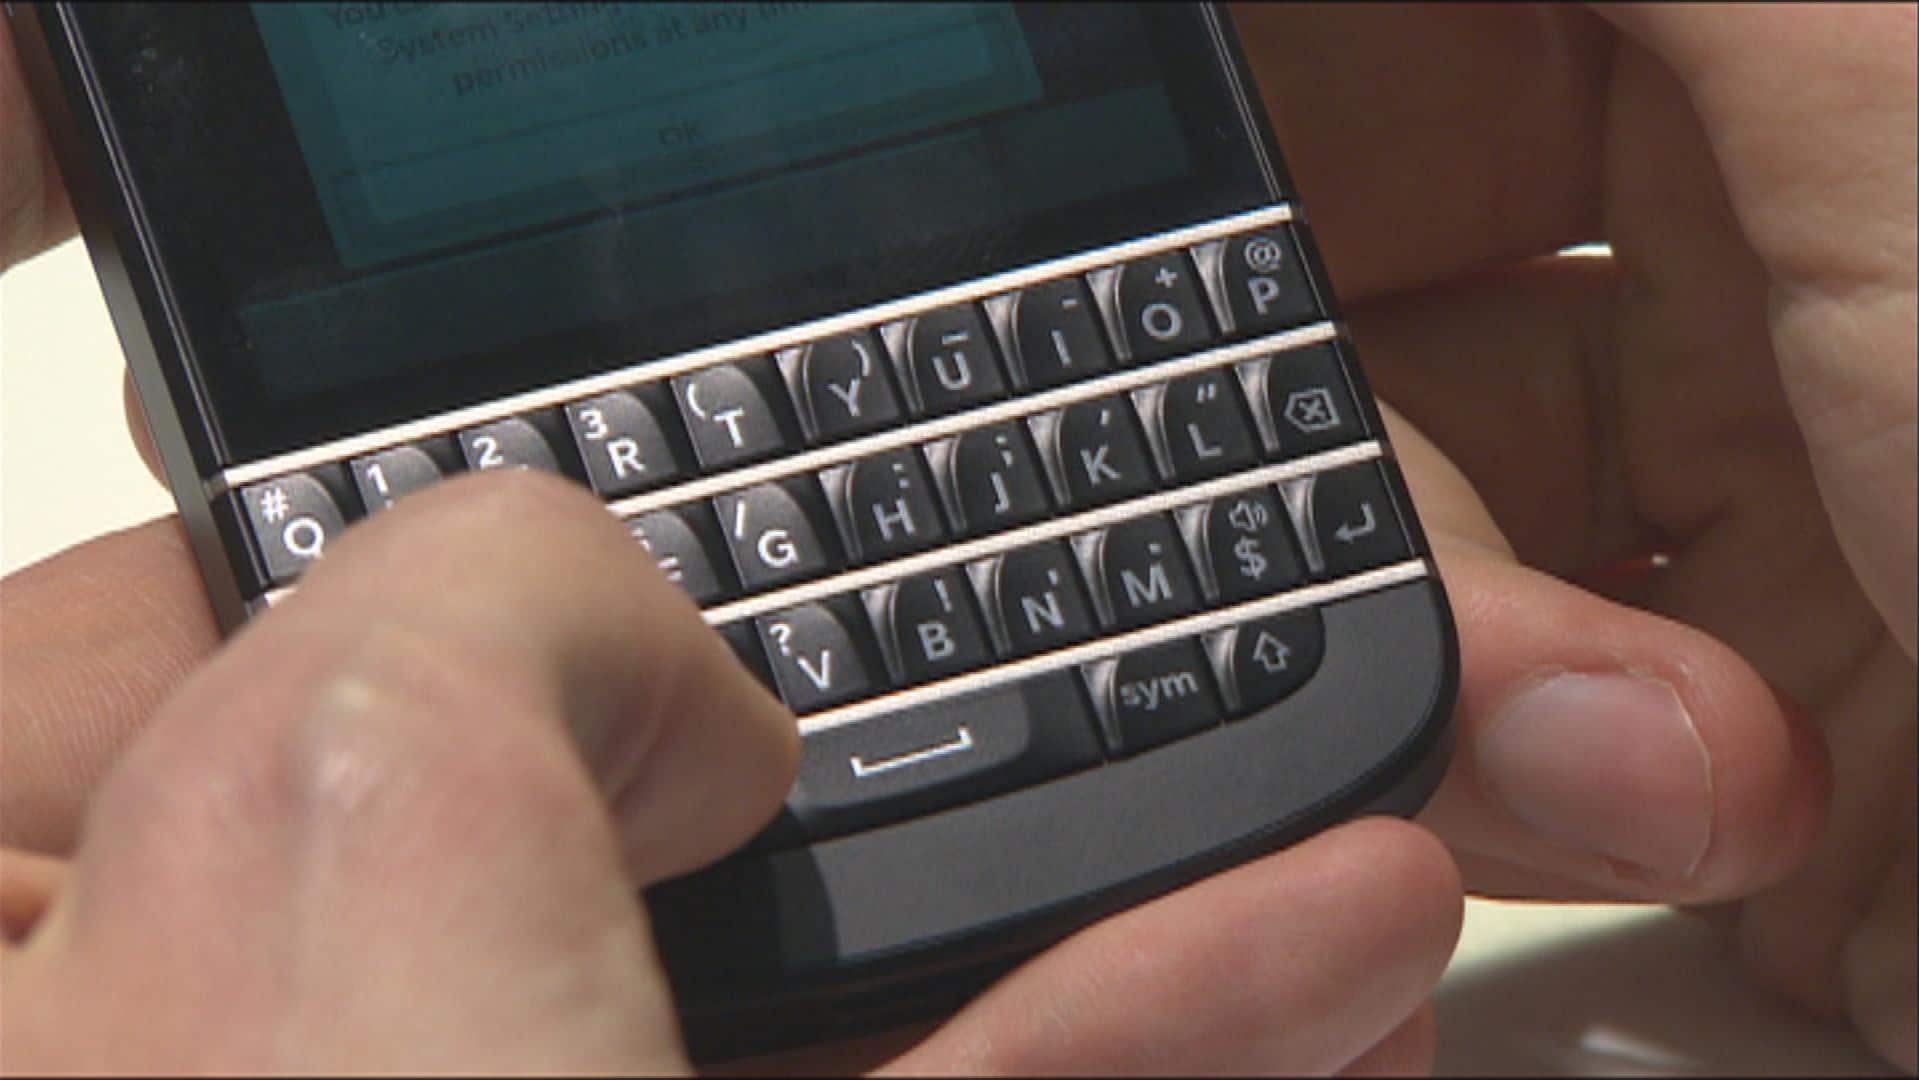 Still using a classic BlackBerry? It's going to stop working today, company says